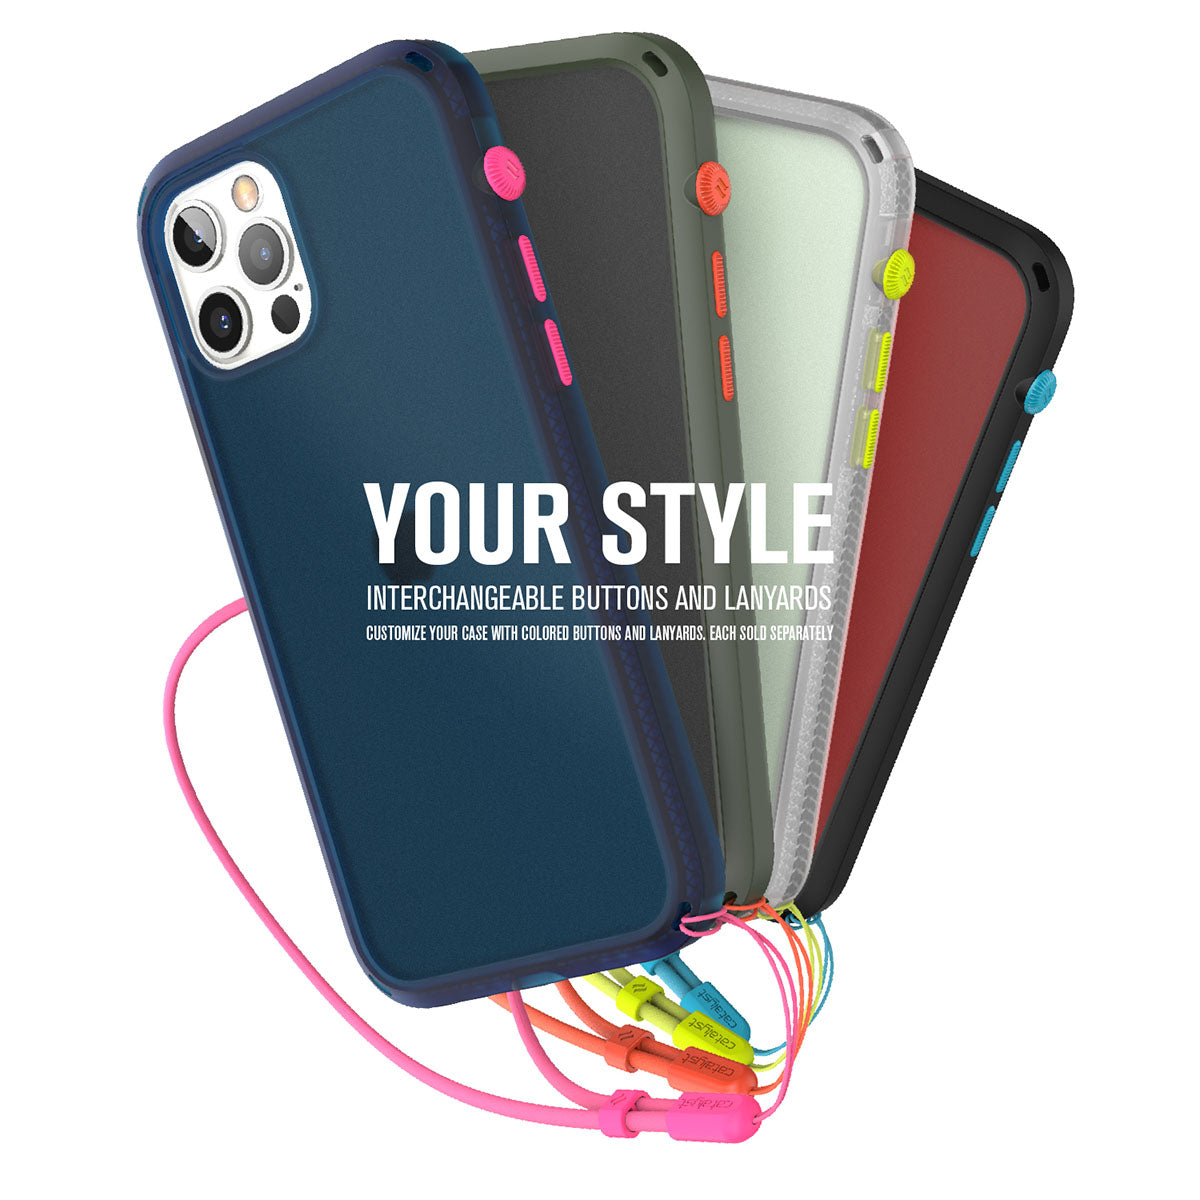 catalyst colored lanyard & buttons showing all the colors installed on the cases text reads your style interchangeable buttons and lanyards customerize your case with colored buttons and lanyards each sold separately